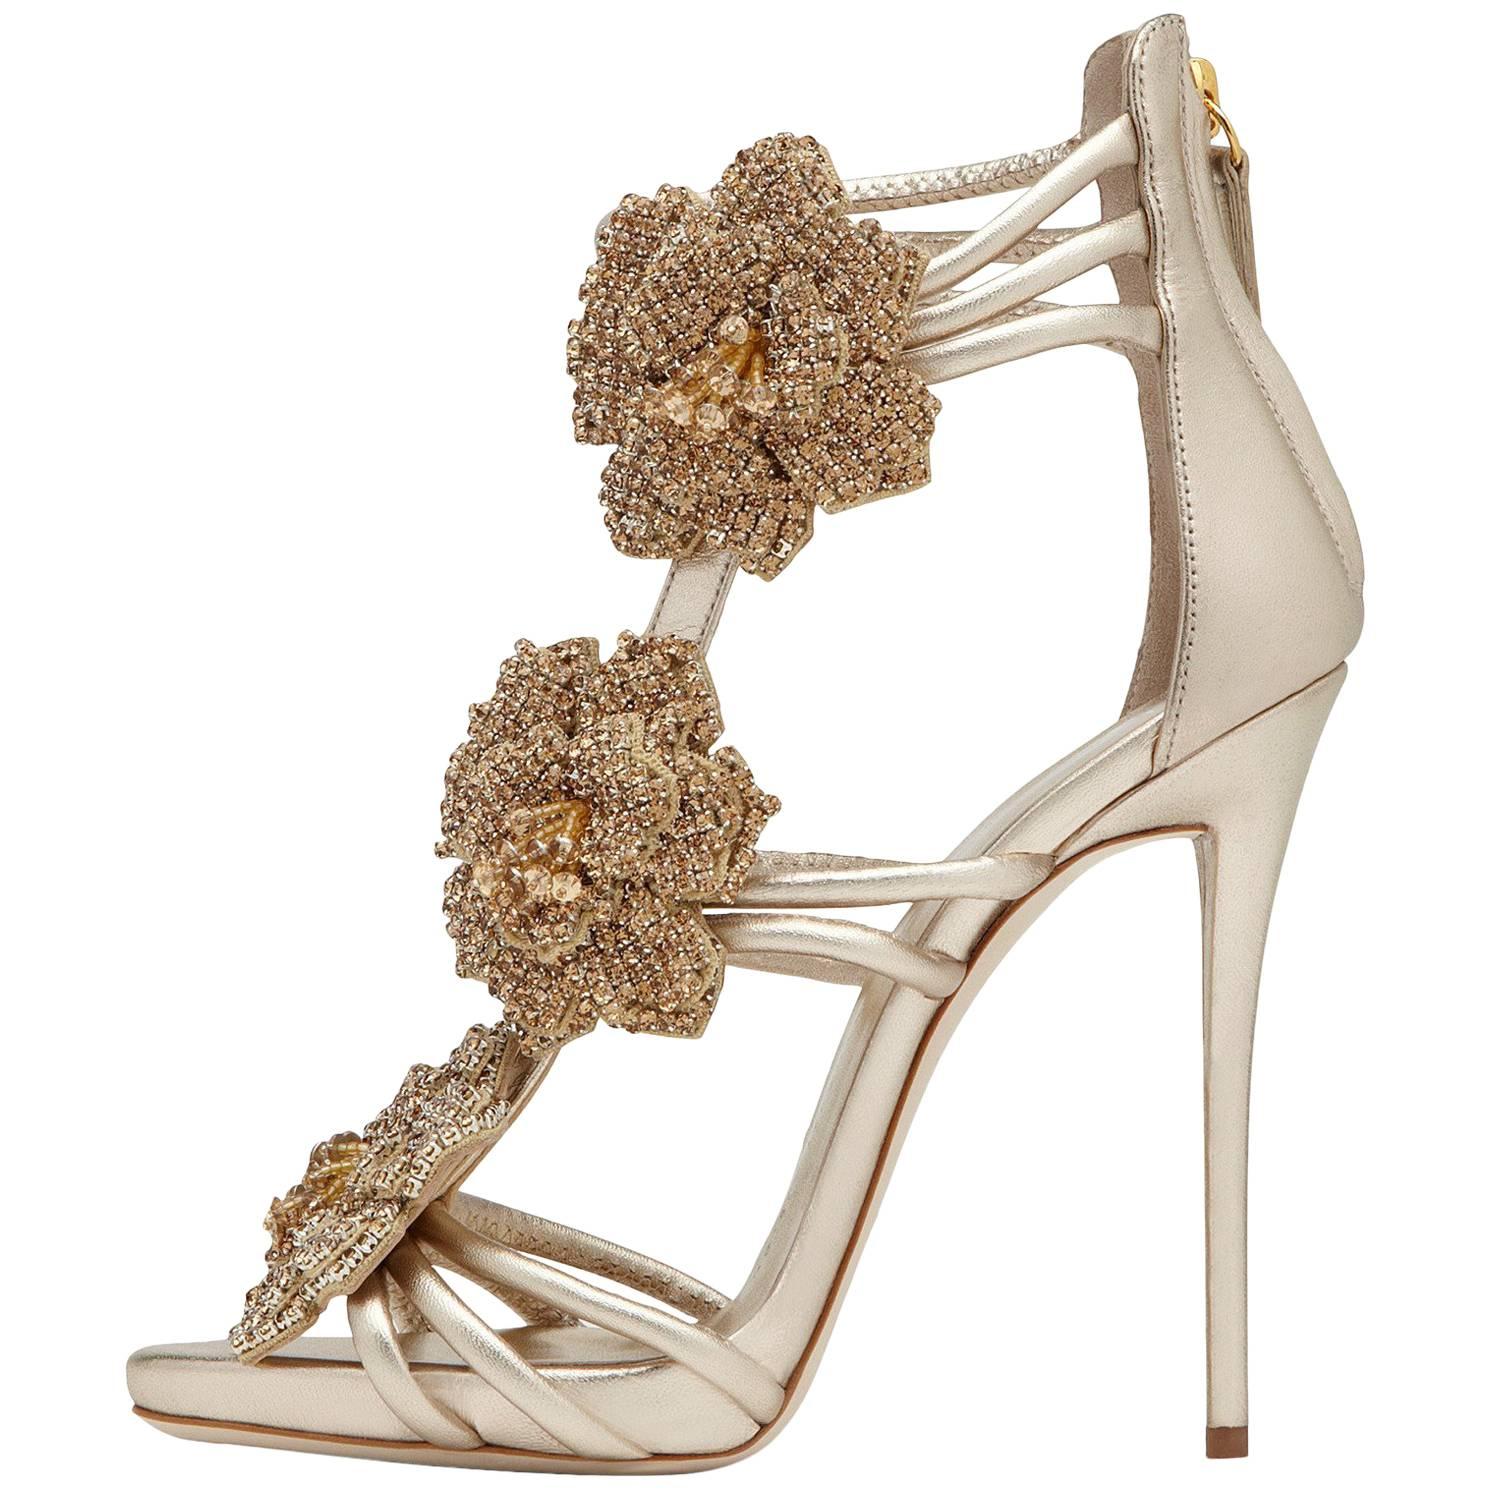 Giuseppe Zanotti New Gold Leather Crystal Flower Evening Sandals Heels in Box